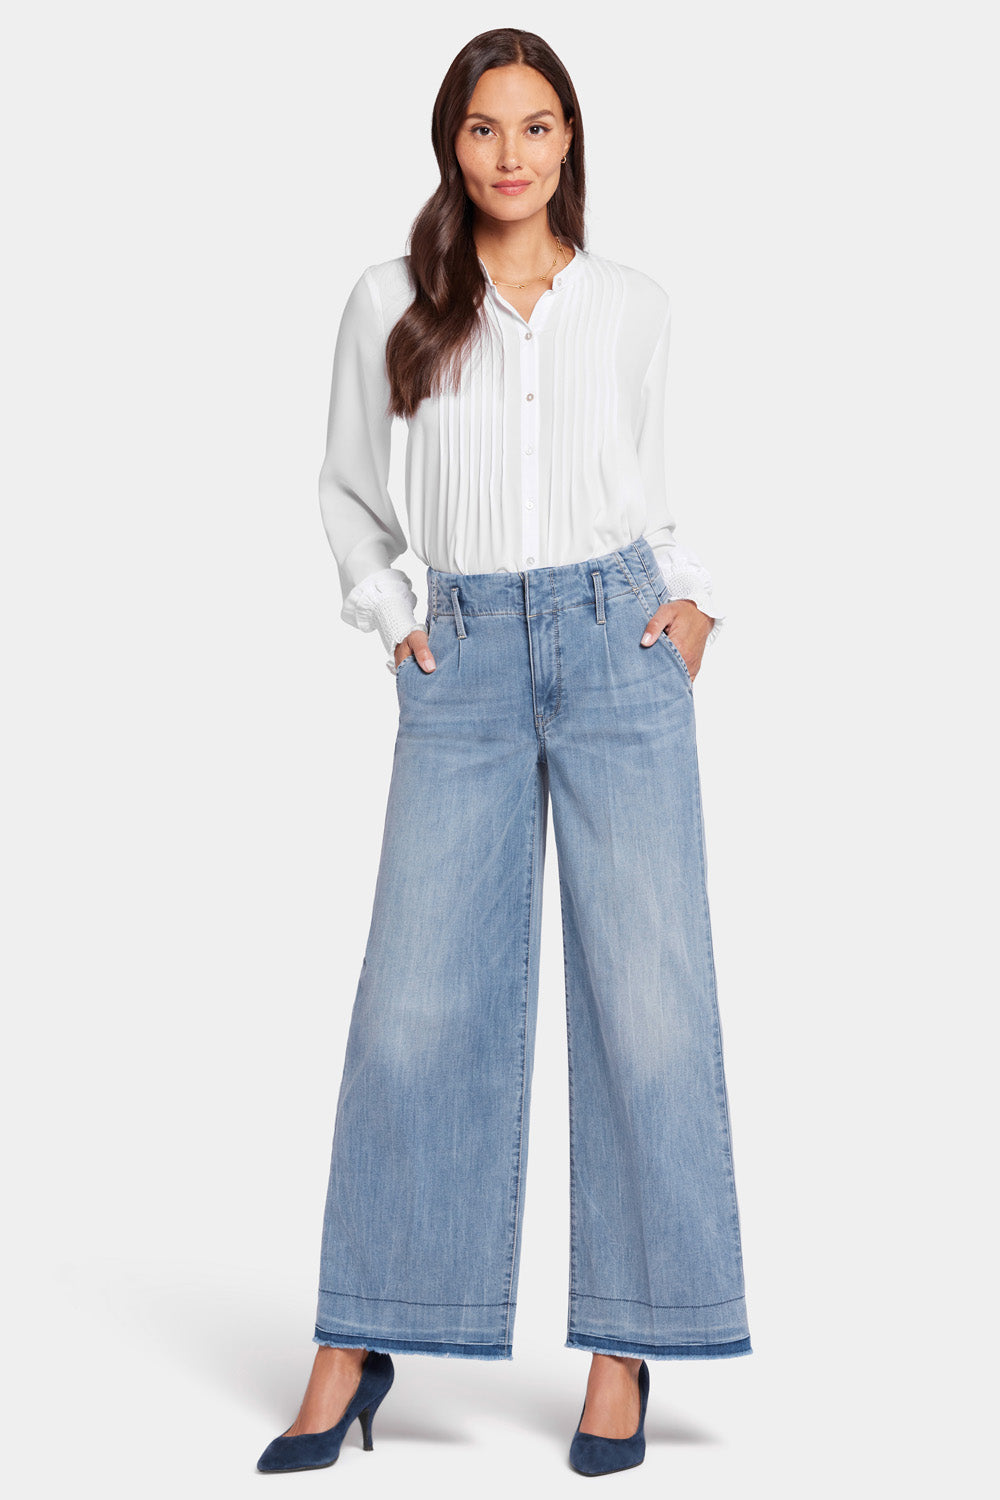 NYDJ Mona Wide Leg Trouser Jeans With High Rise And Frayed Shadow Hems - State